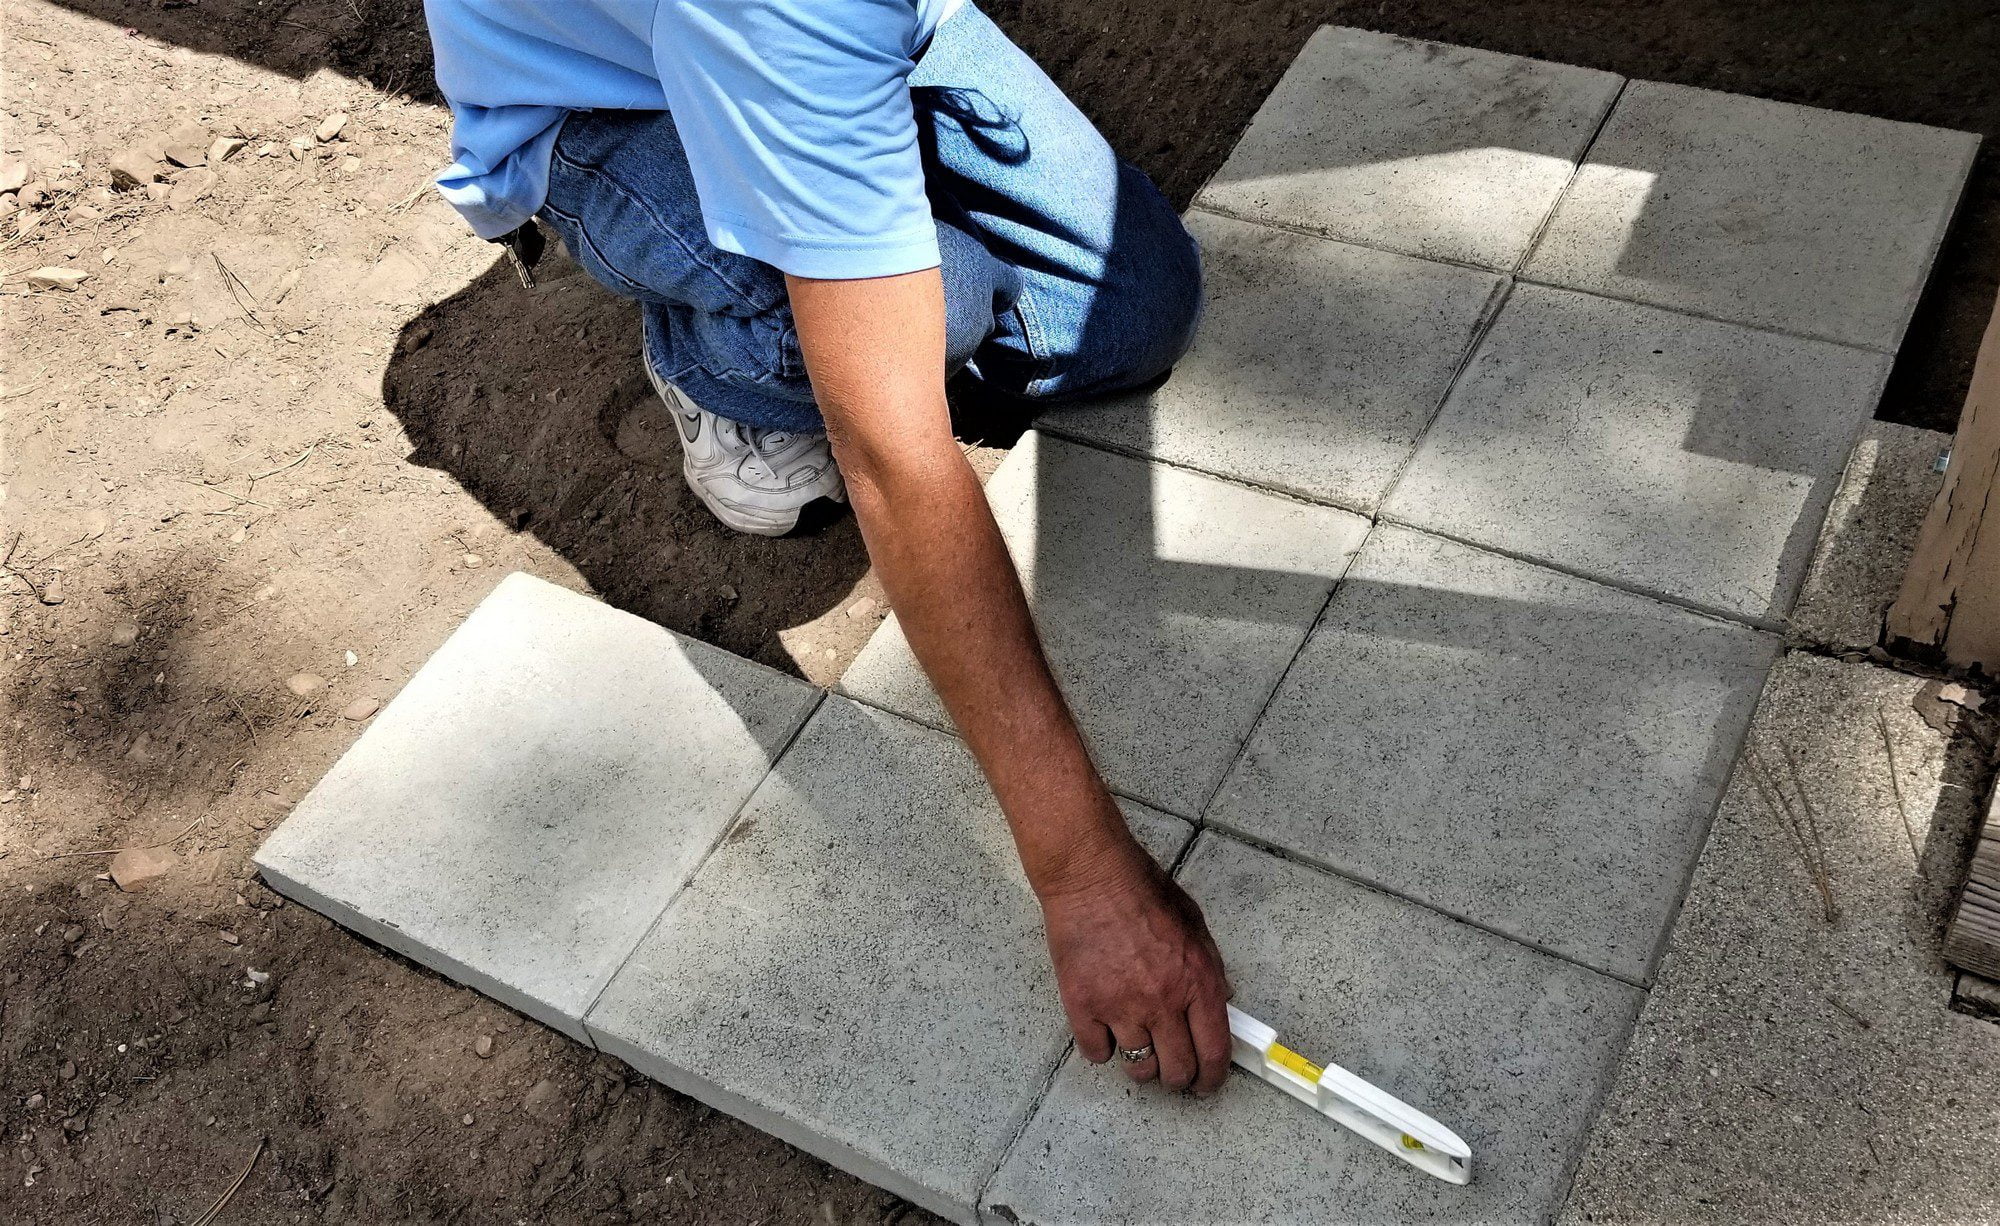 The image shows a person installing square concrete pavers or tiles outdoors. The person is bent over the work area and appears to be using a tool, possibly a rubber mallet or similar device, for setting the pavers in place. Some pavers are already laid down, forming a pattern on the ground. The photograph captures a moment of manual work, specifically the process of laying pavers to create a hard, flat surface, such as a patio, walkway, or driveway.